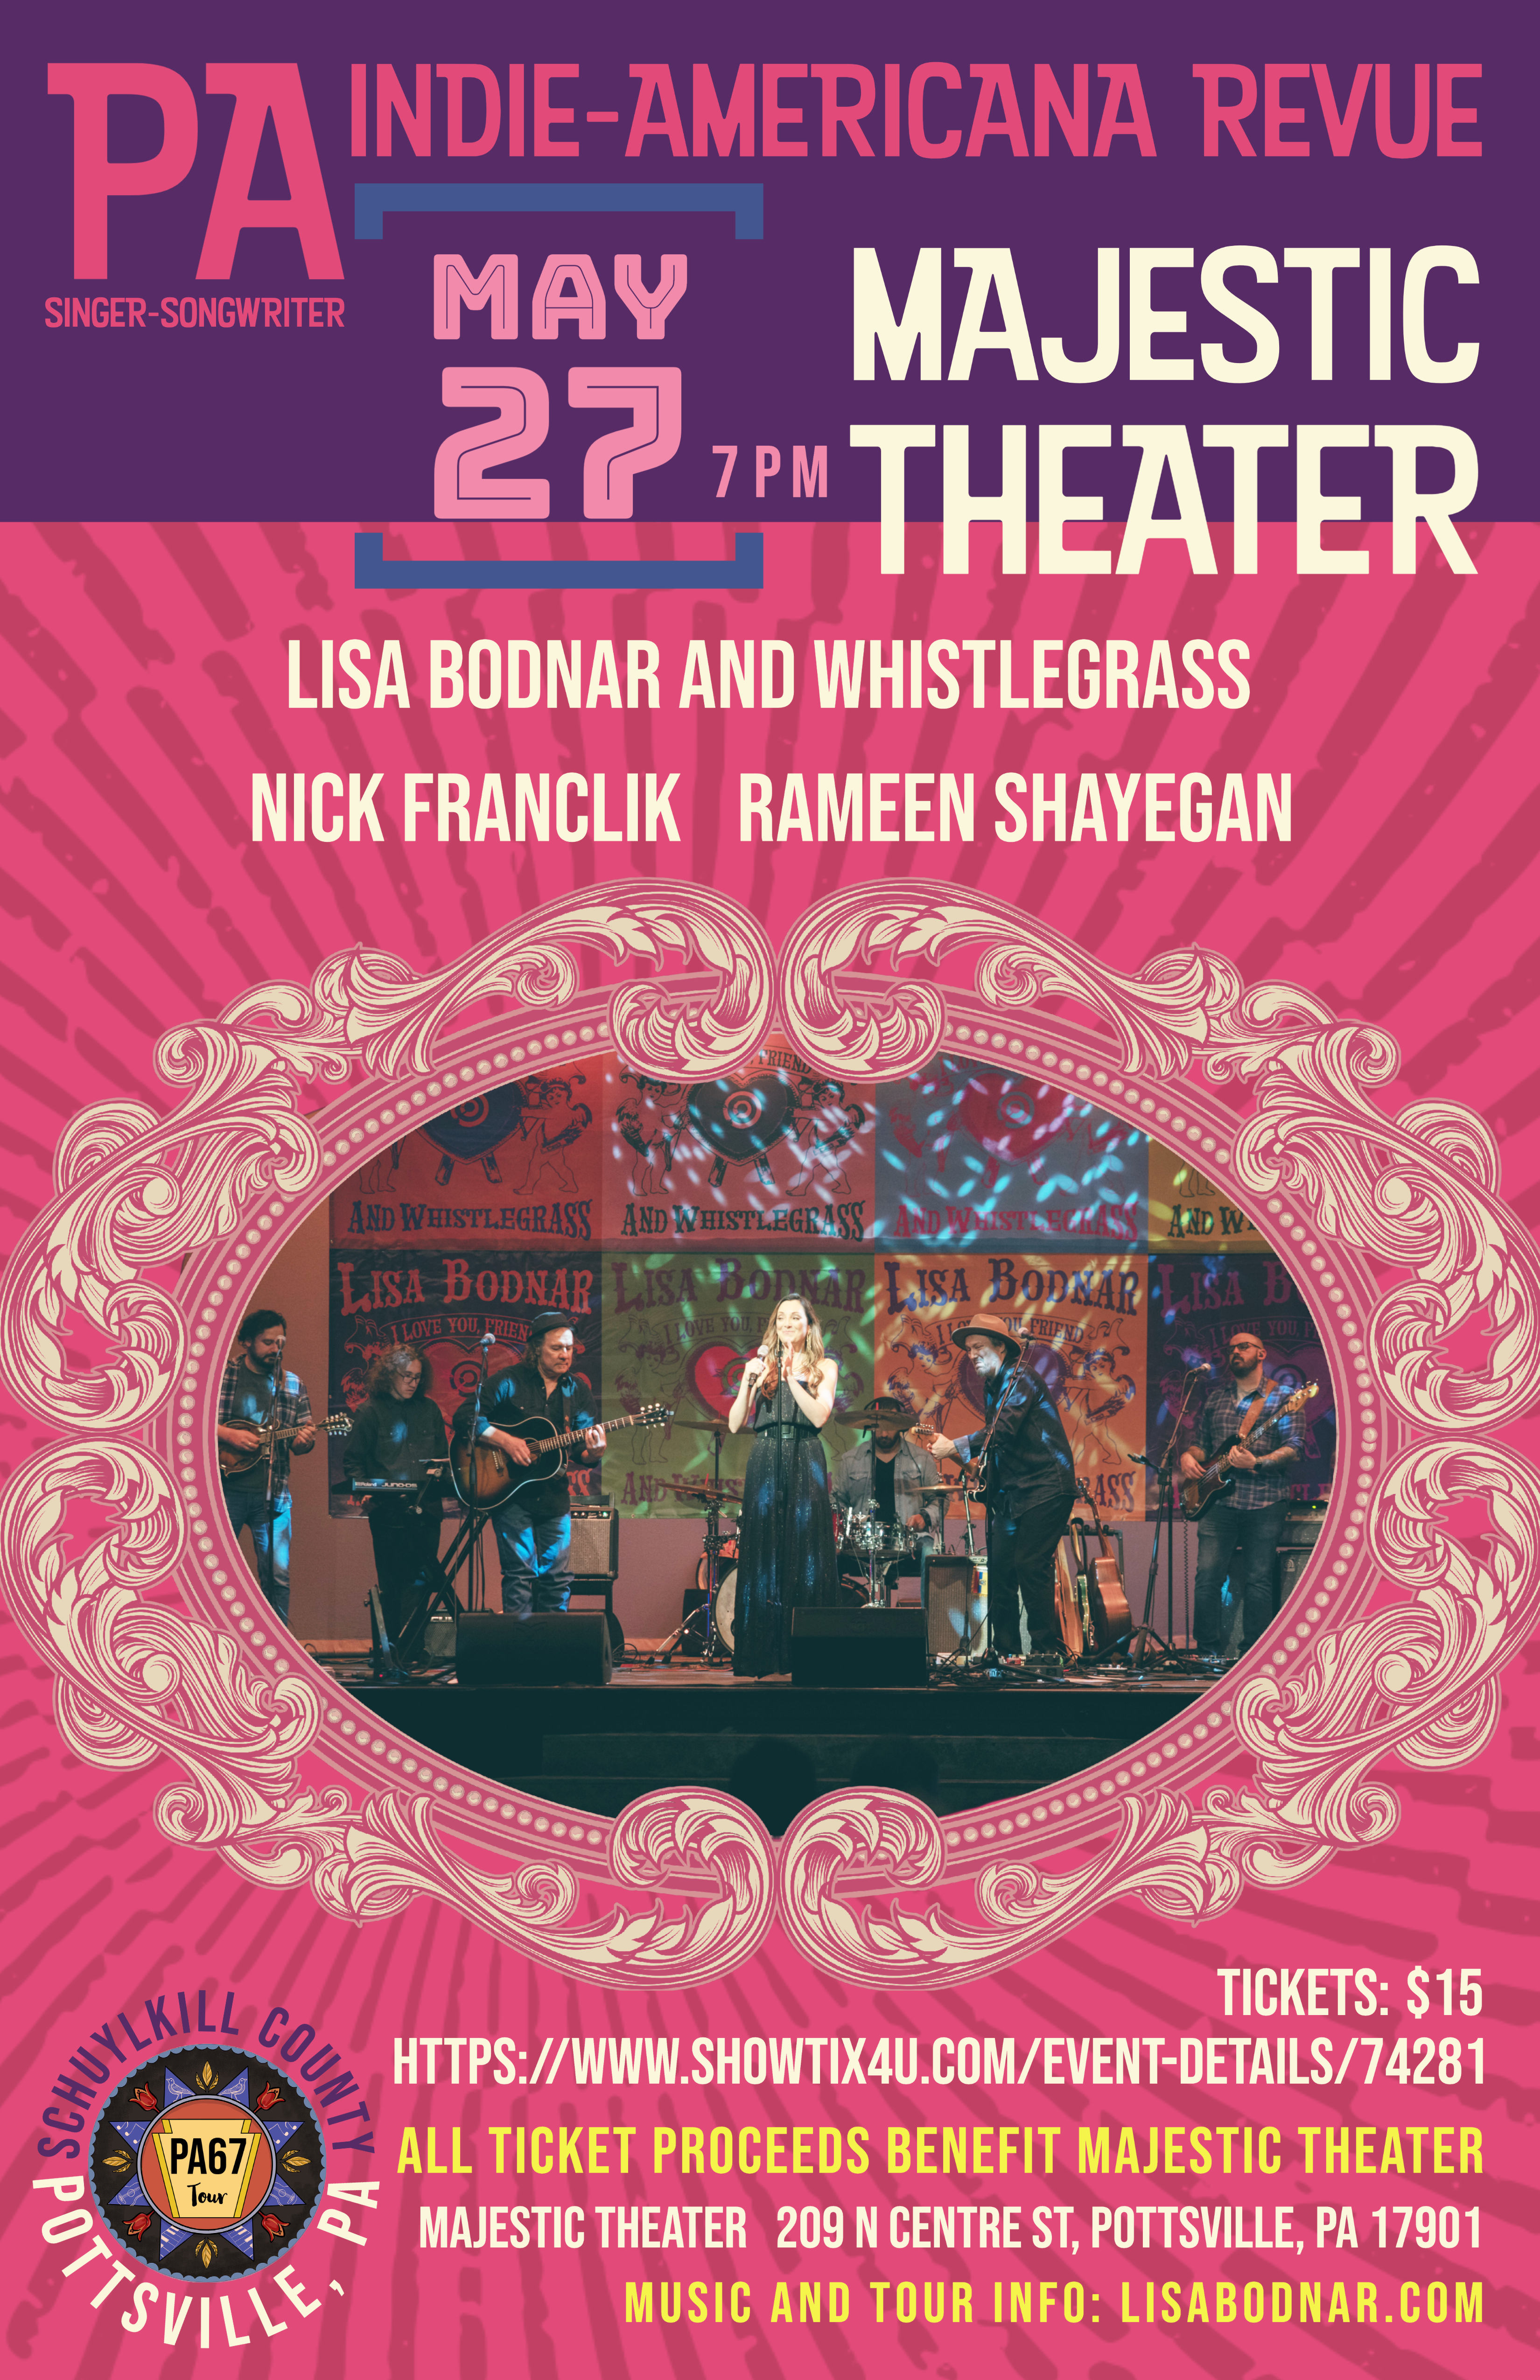 Lisa Bodnar and Whistlegrass Live at the Majestic Theater PA Singer-Songwriter Review May 27 with Nick Frankclik and Rameen Shayegan